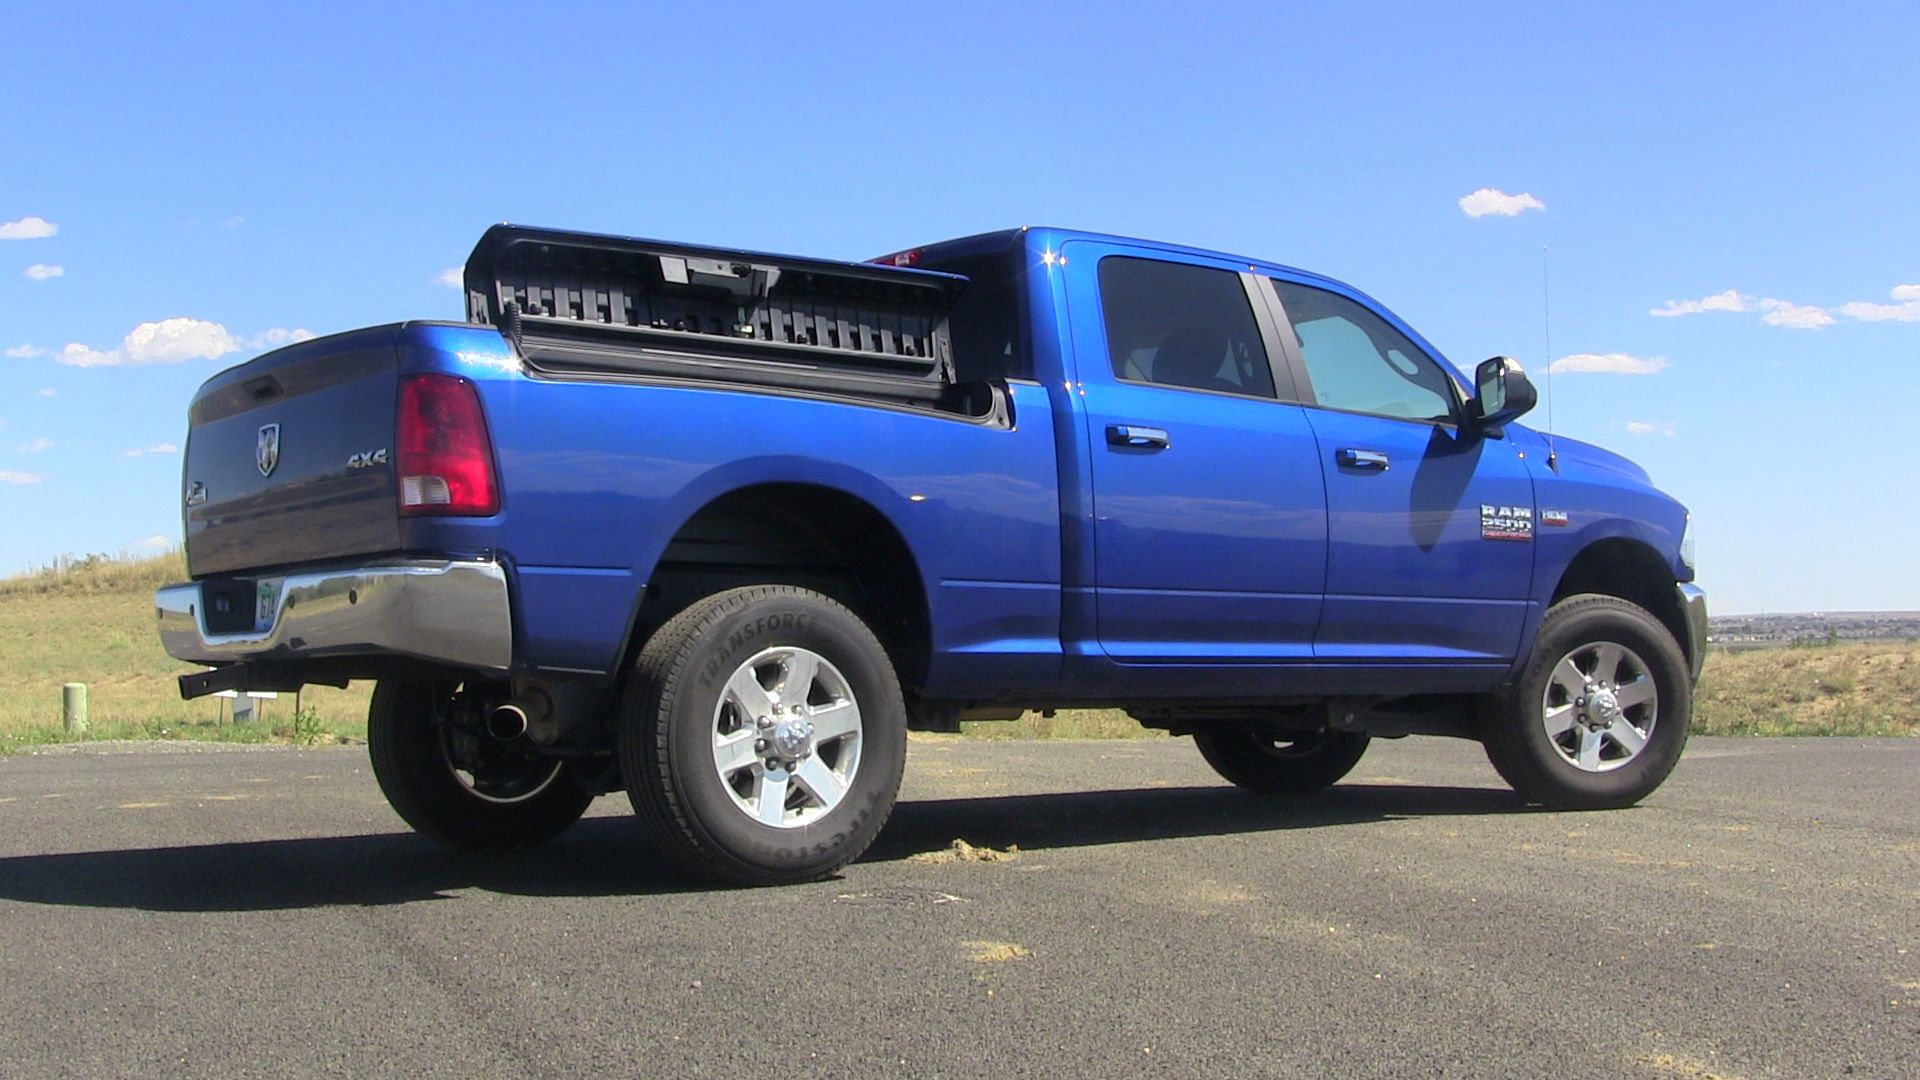 2014 Ram 2500 HD 6.4L Hemi - Delivering Promises? [Review] - The Fast